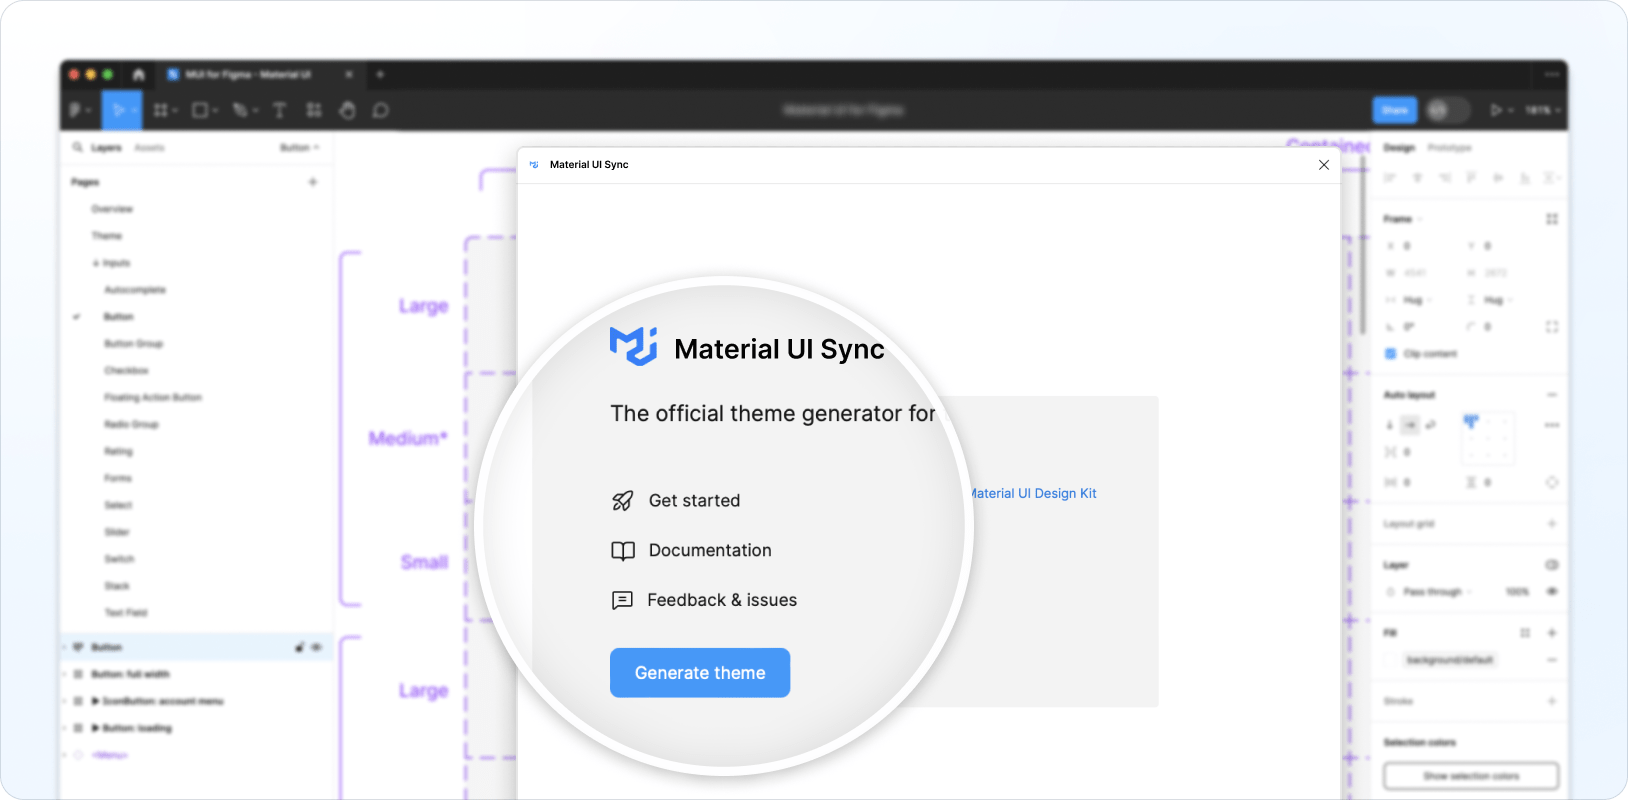 The Generate theme button in the Material UI Sync plugin UI.